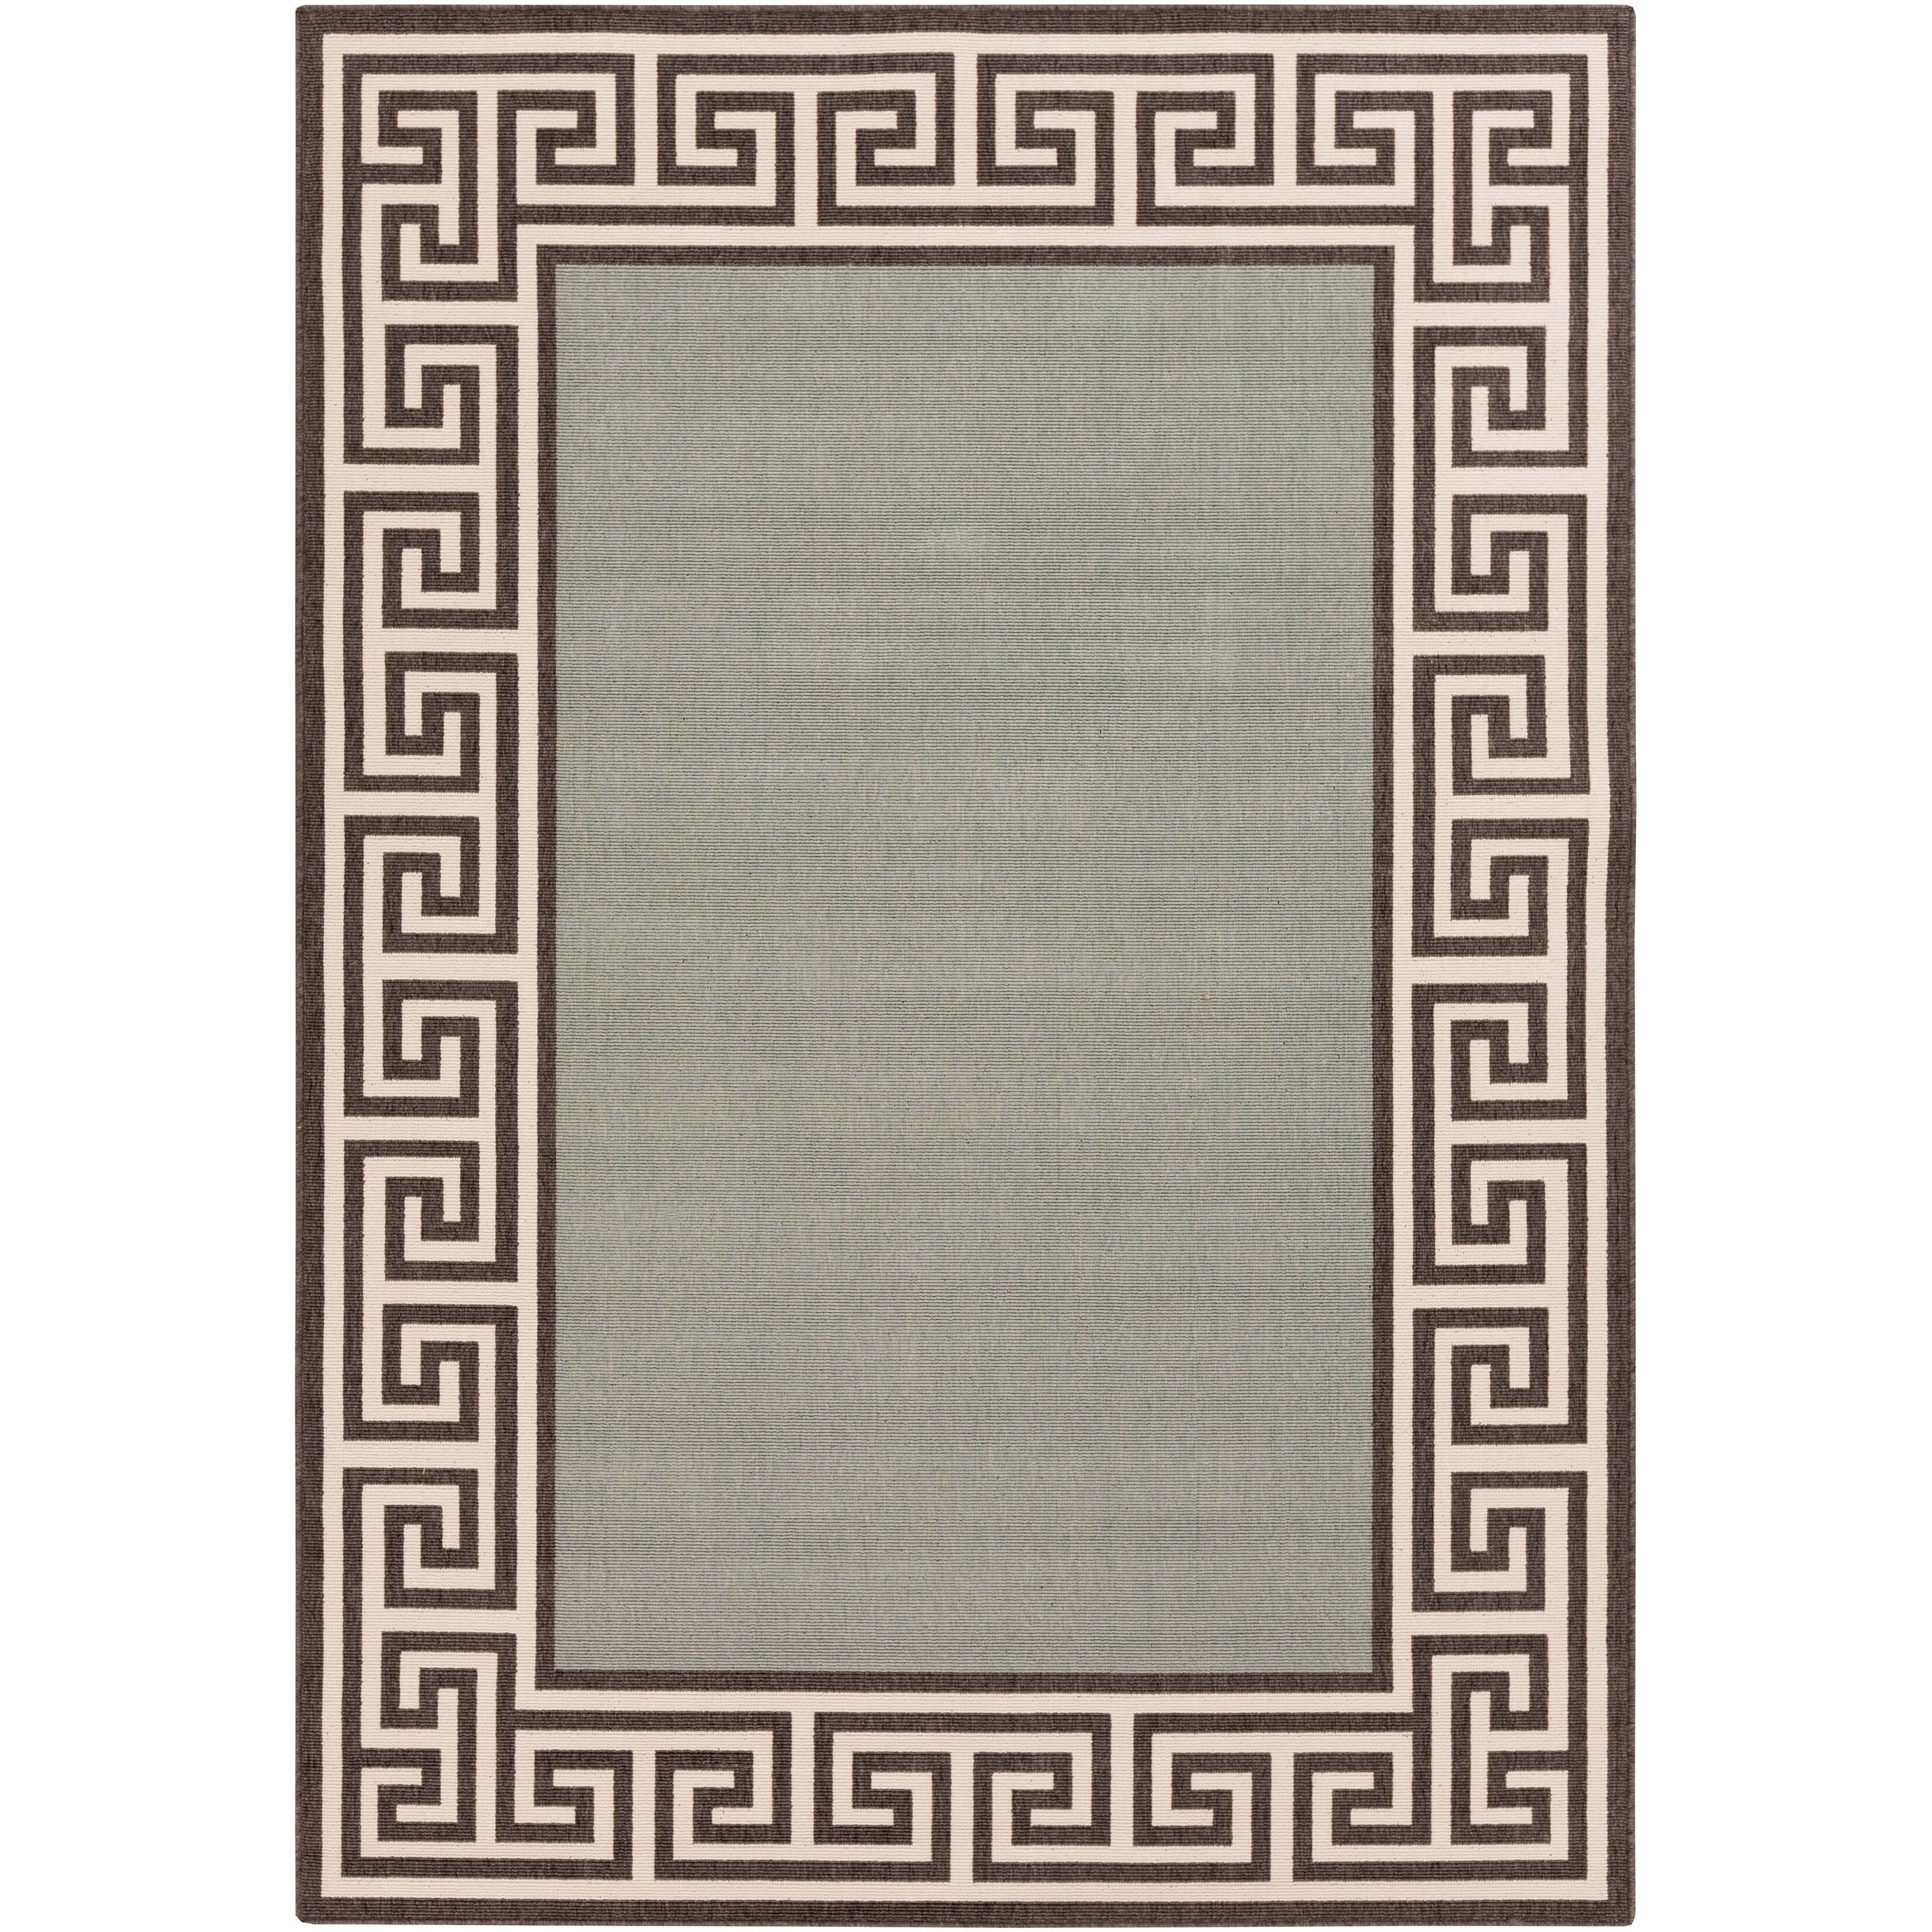 https://ak1.ostkcdn.com/images/products/is/images/direct/963b7c843e966532e804d964b13357a54dd0df6f/Annette-Contemporary-Bordered-Indoor-Outdoor-Area-Rug.jpg